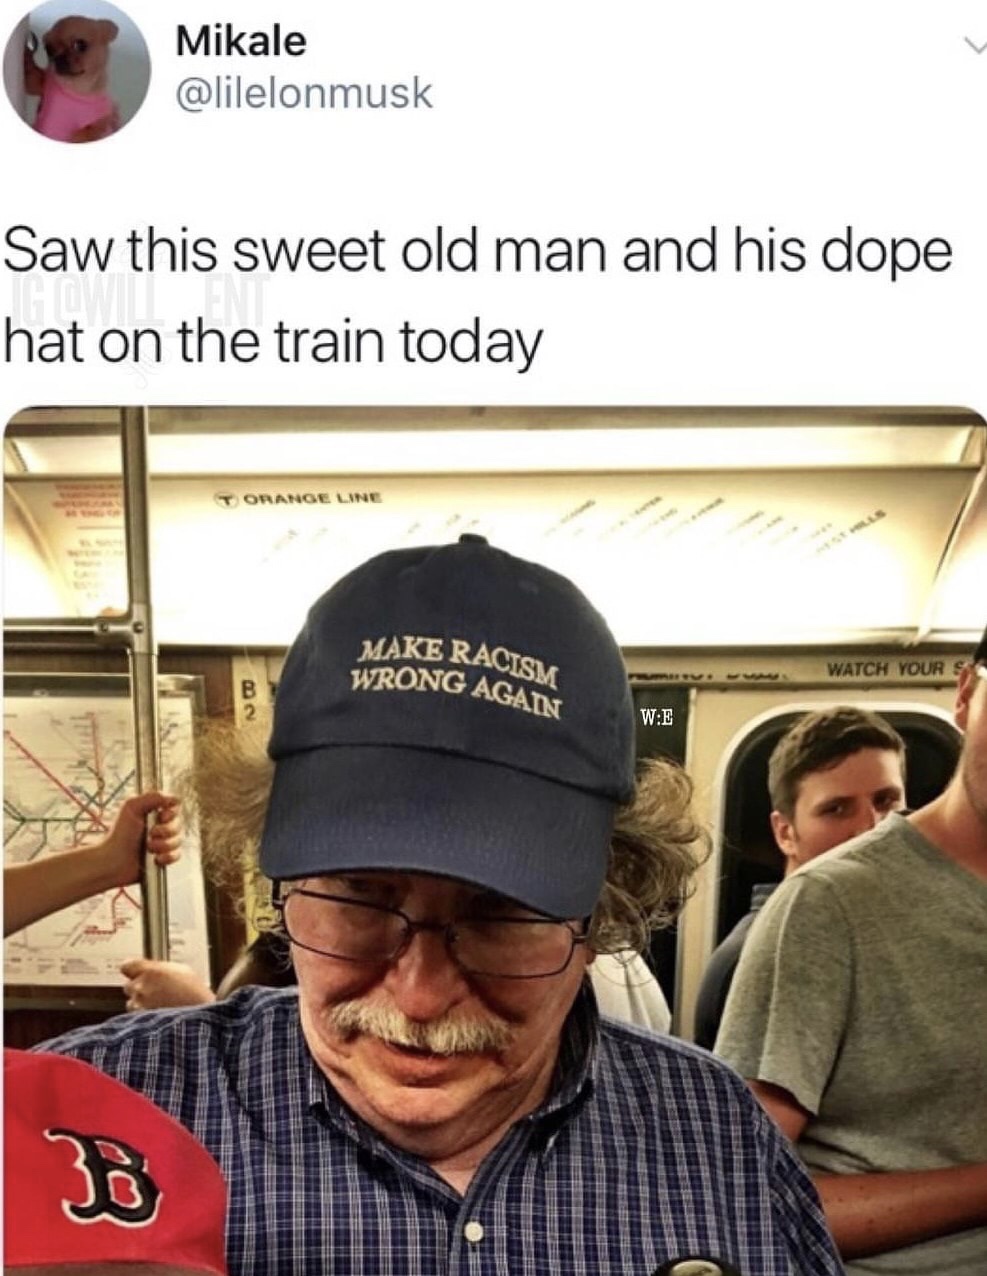 memes - make racism wrong again hat - Mikale Saw this sweet old man and his dope hat on the train today T Orange Line Make Racism Wrong Again Watch Your S We